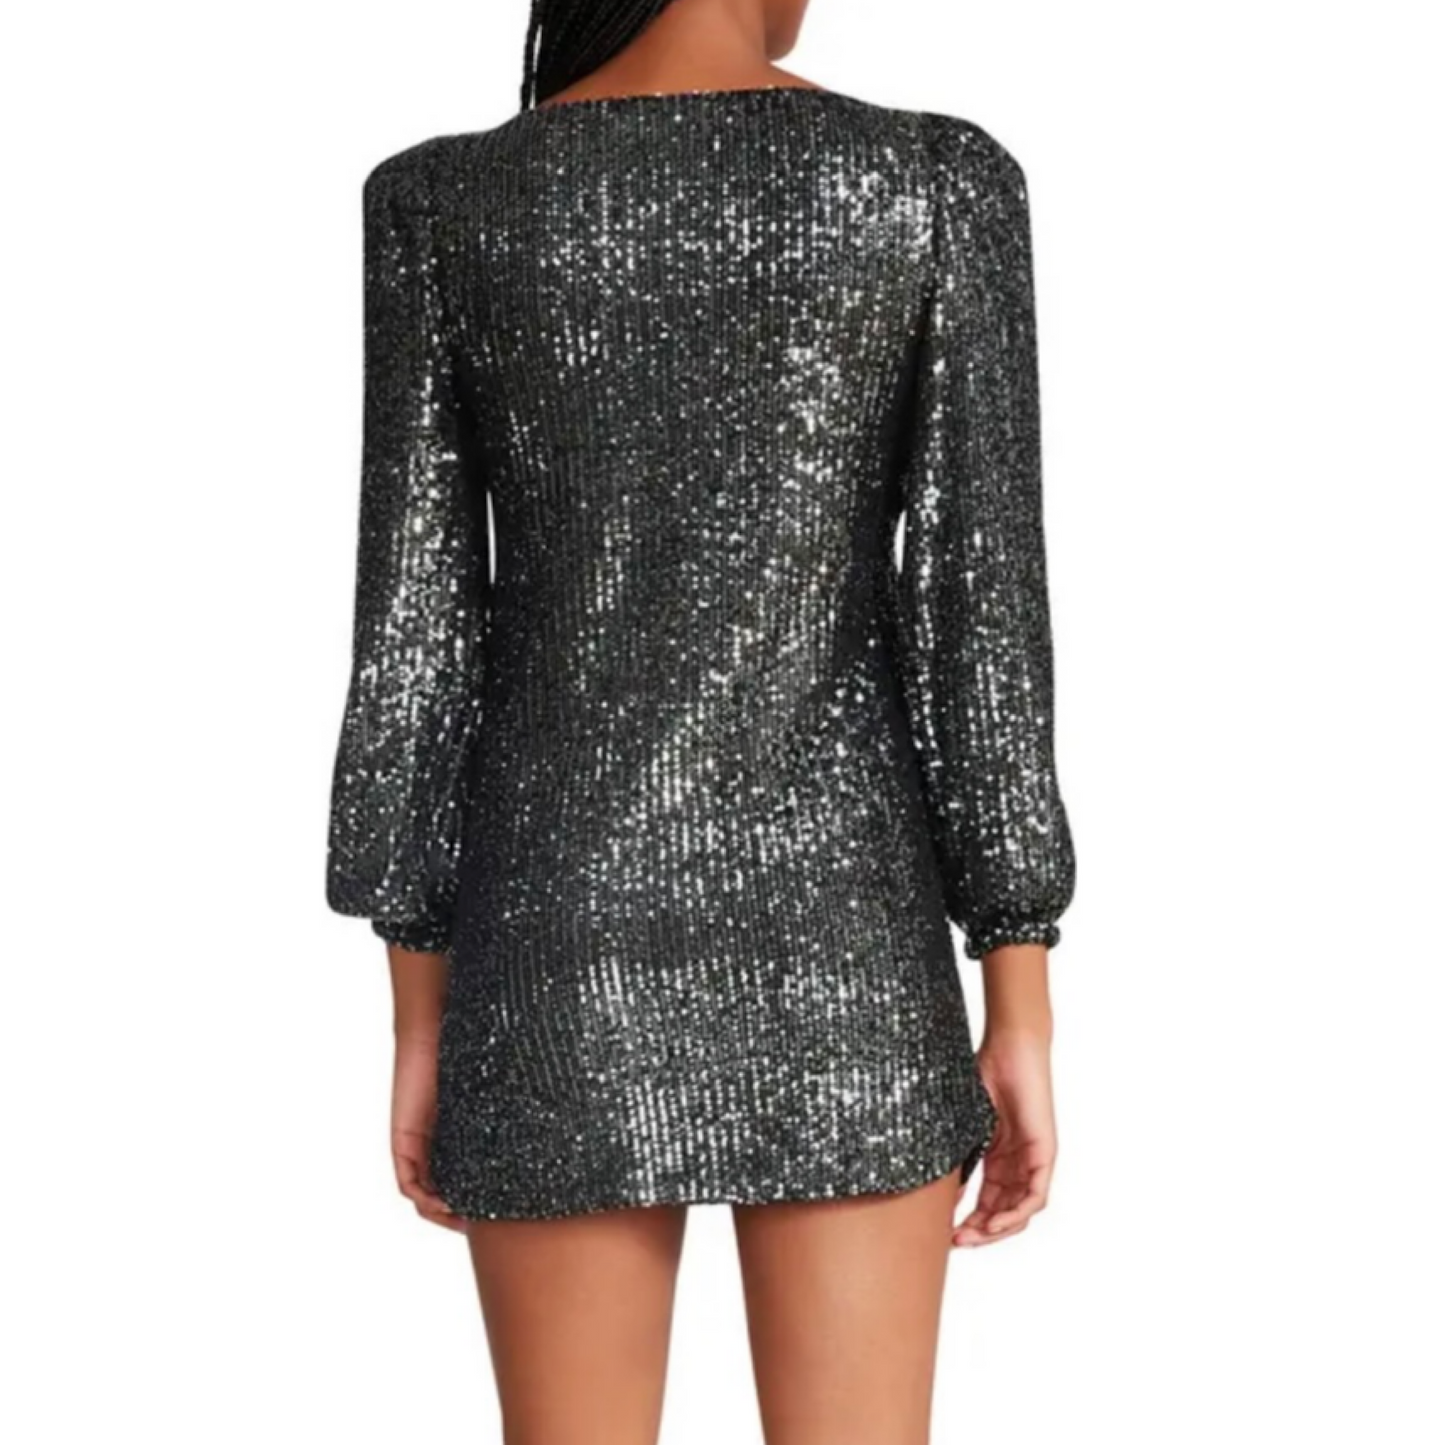 Allover sequins add plenty of sparkle and shine to this long-sleeve minidress.